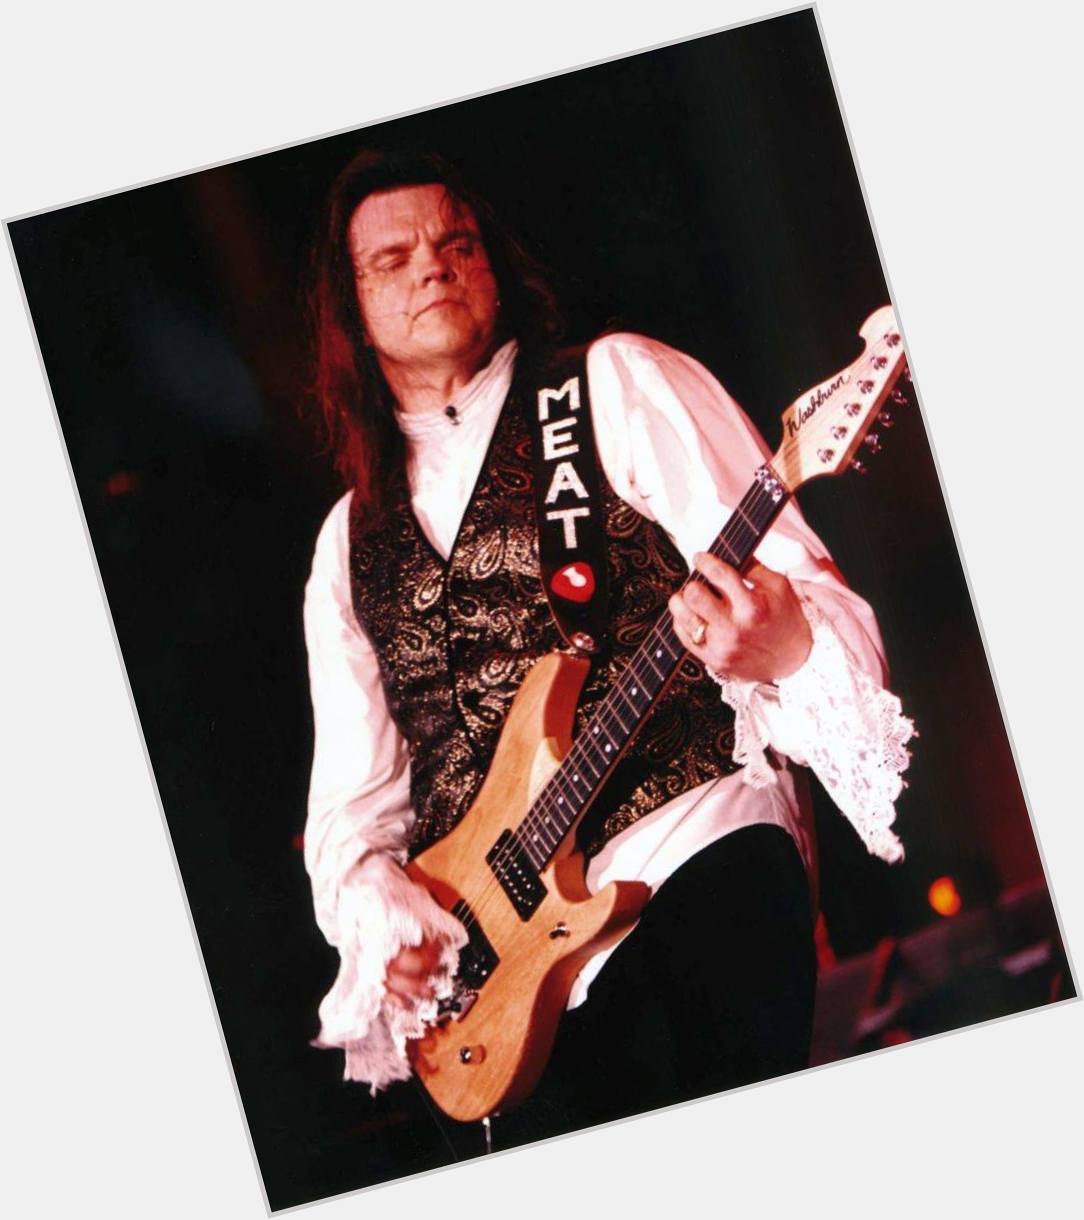 Happy Birthday to Michael Lee Aday, better known as Meat Loaf! 